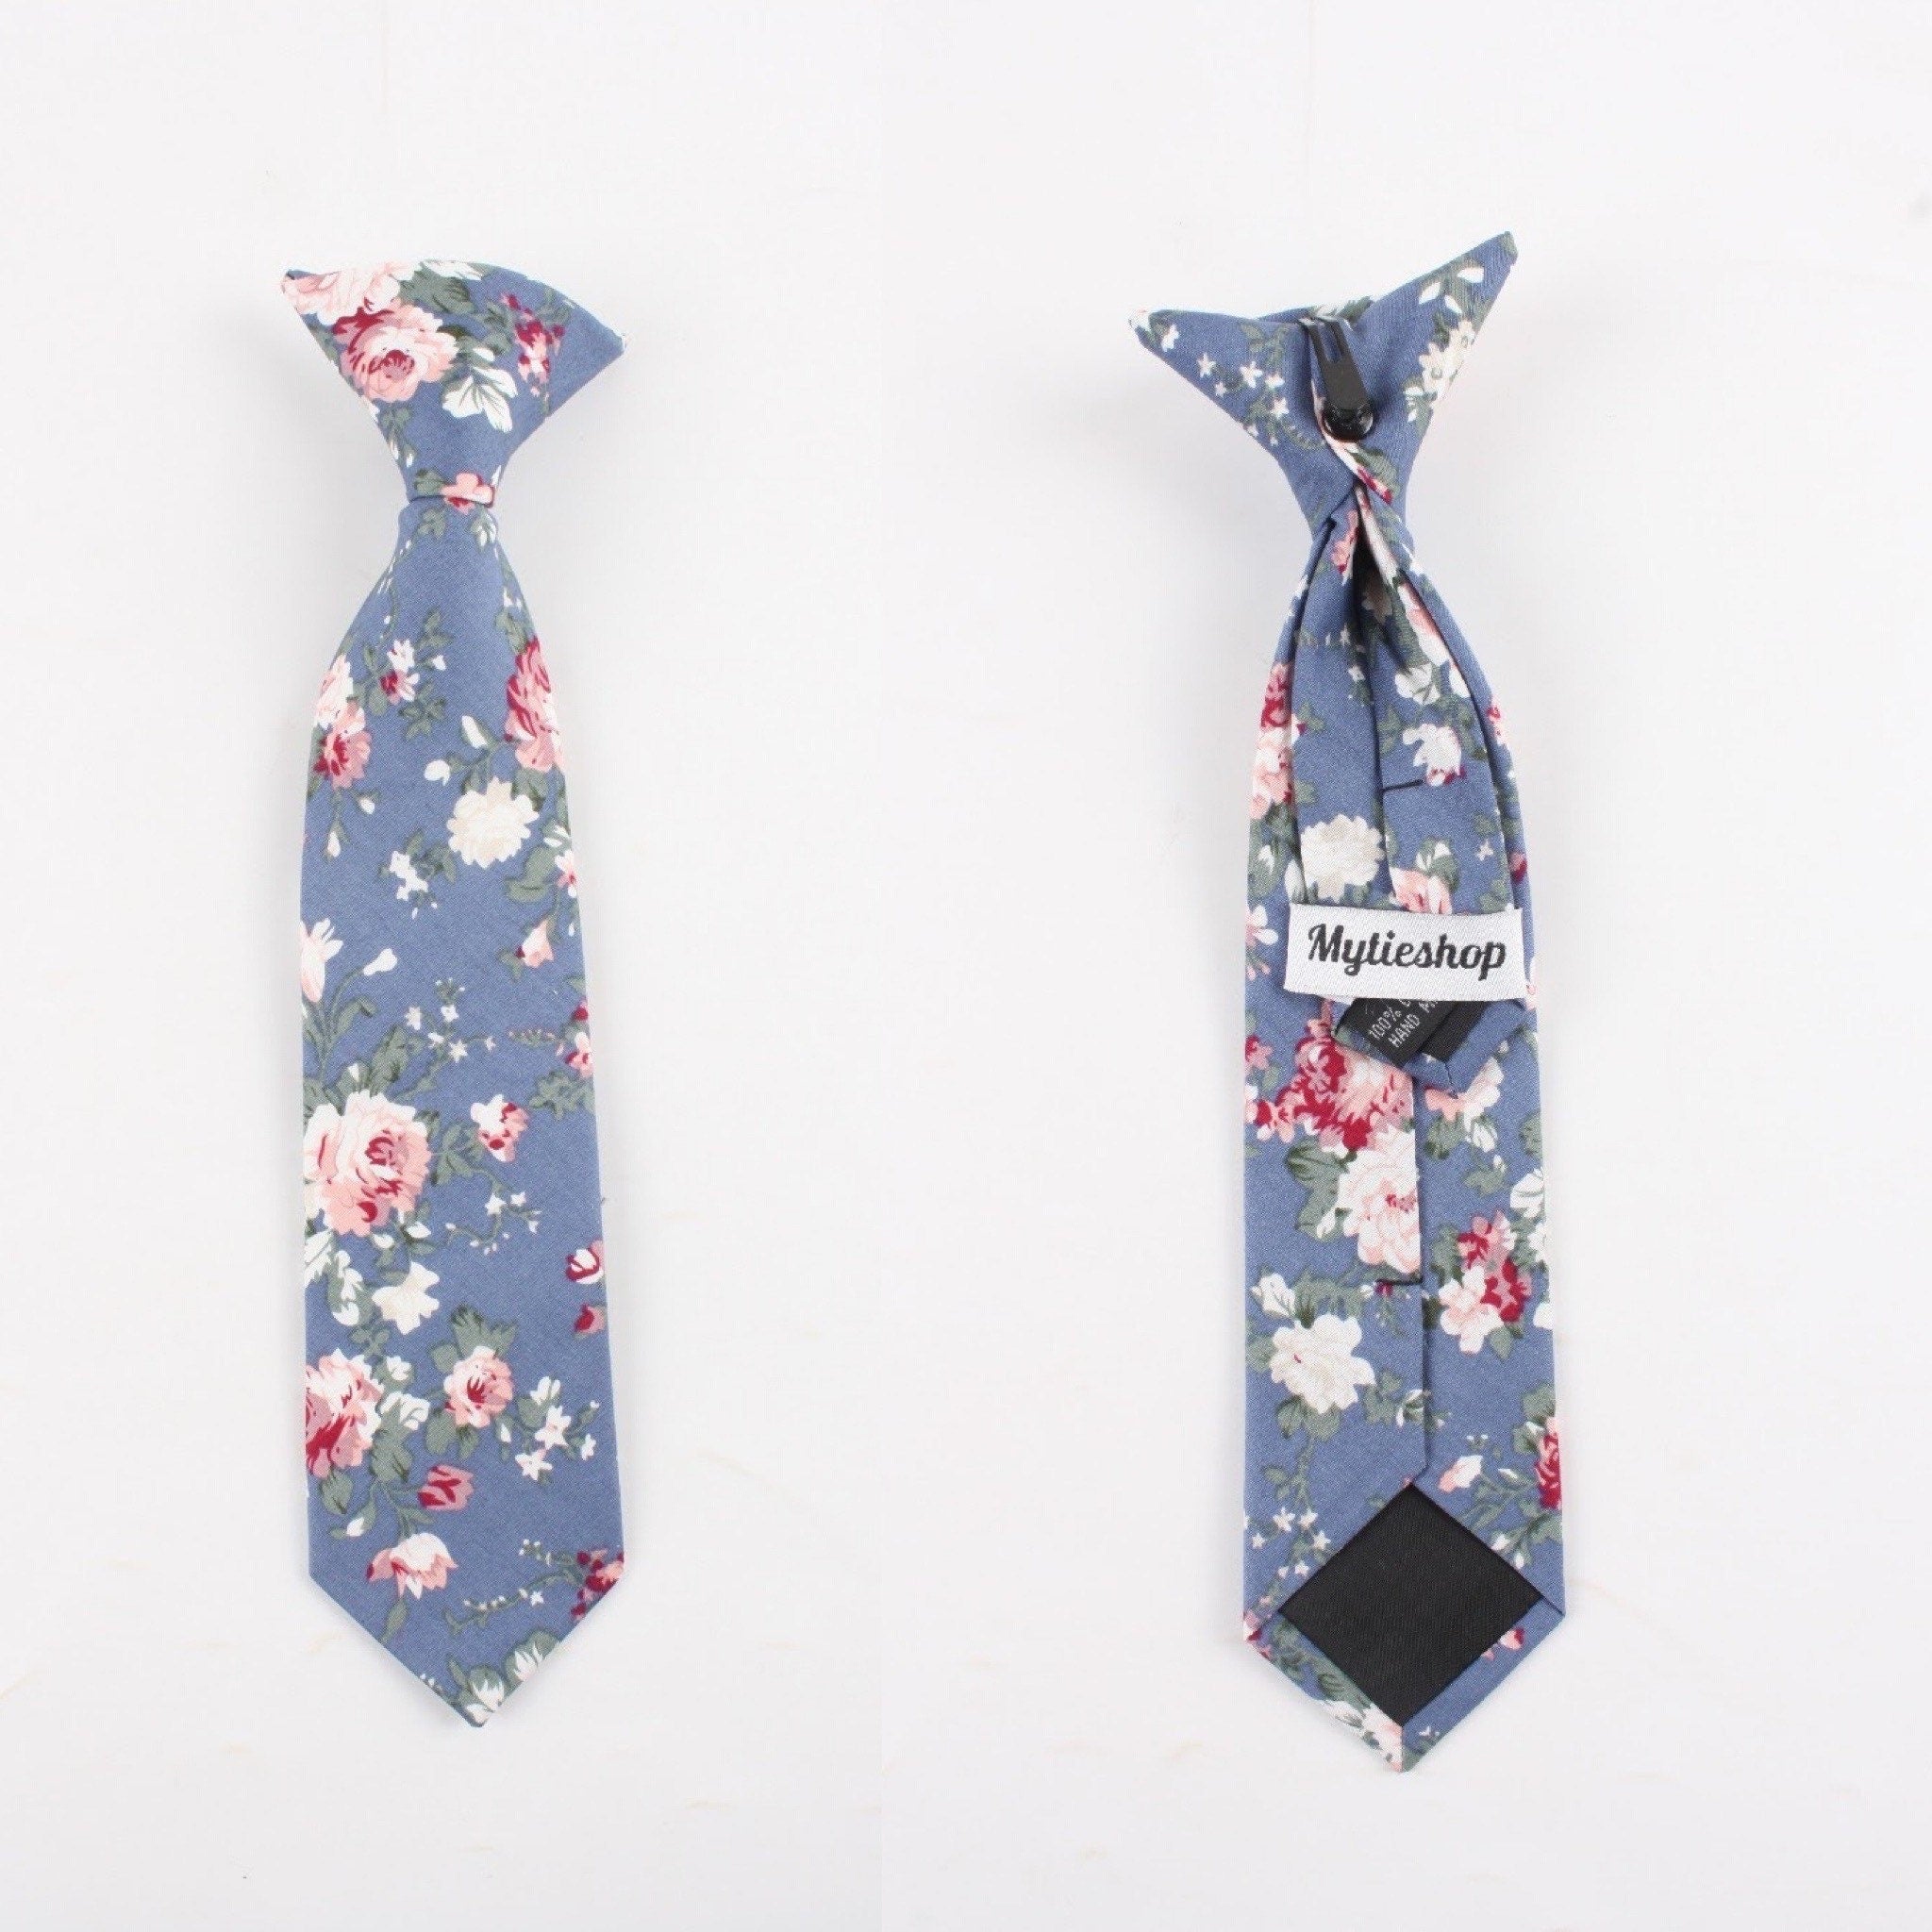 Boys Floral Clip On Tie 2.3&quot; NEIL-Boys Floral Clip On Tie Material:Cotton Blend Approx Size: Max width: 6.5 cm / 2.4 inches 9-24 months 26 CM2-5 years 31 CM9-11 Years 43 CM Get your little man looking sharp with this blue floral print tie. This dapper clip-on tie is perfect for any formal occasion, from weddings to christenings. The blue floral print is just the right amount of dainty, and the fit is tailored to fit boys of all ages. With a versatile style that can be dressed up or down, this ti